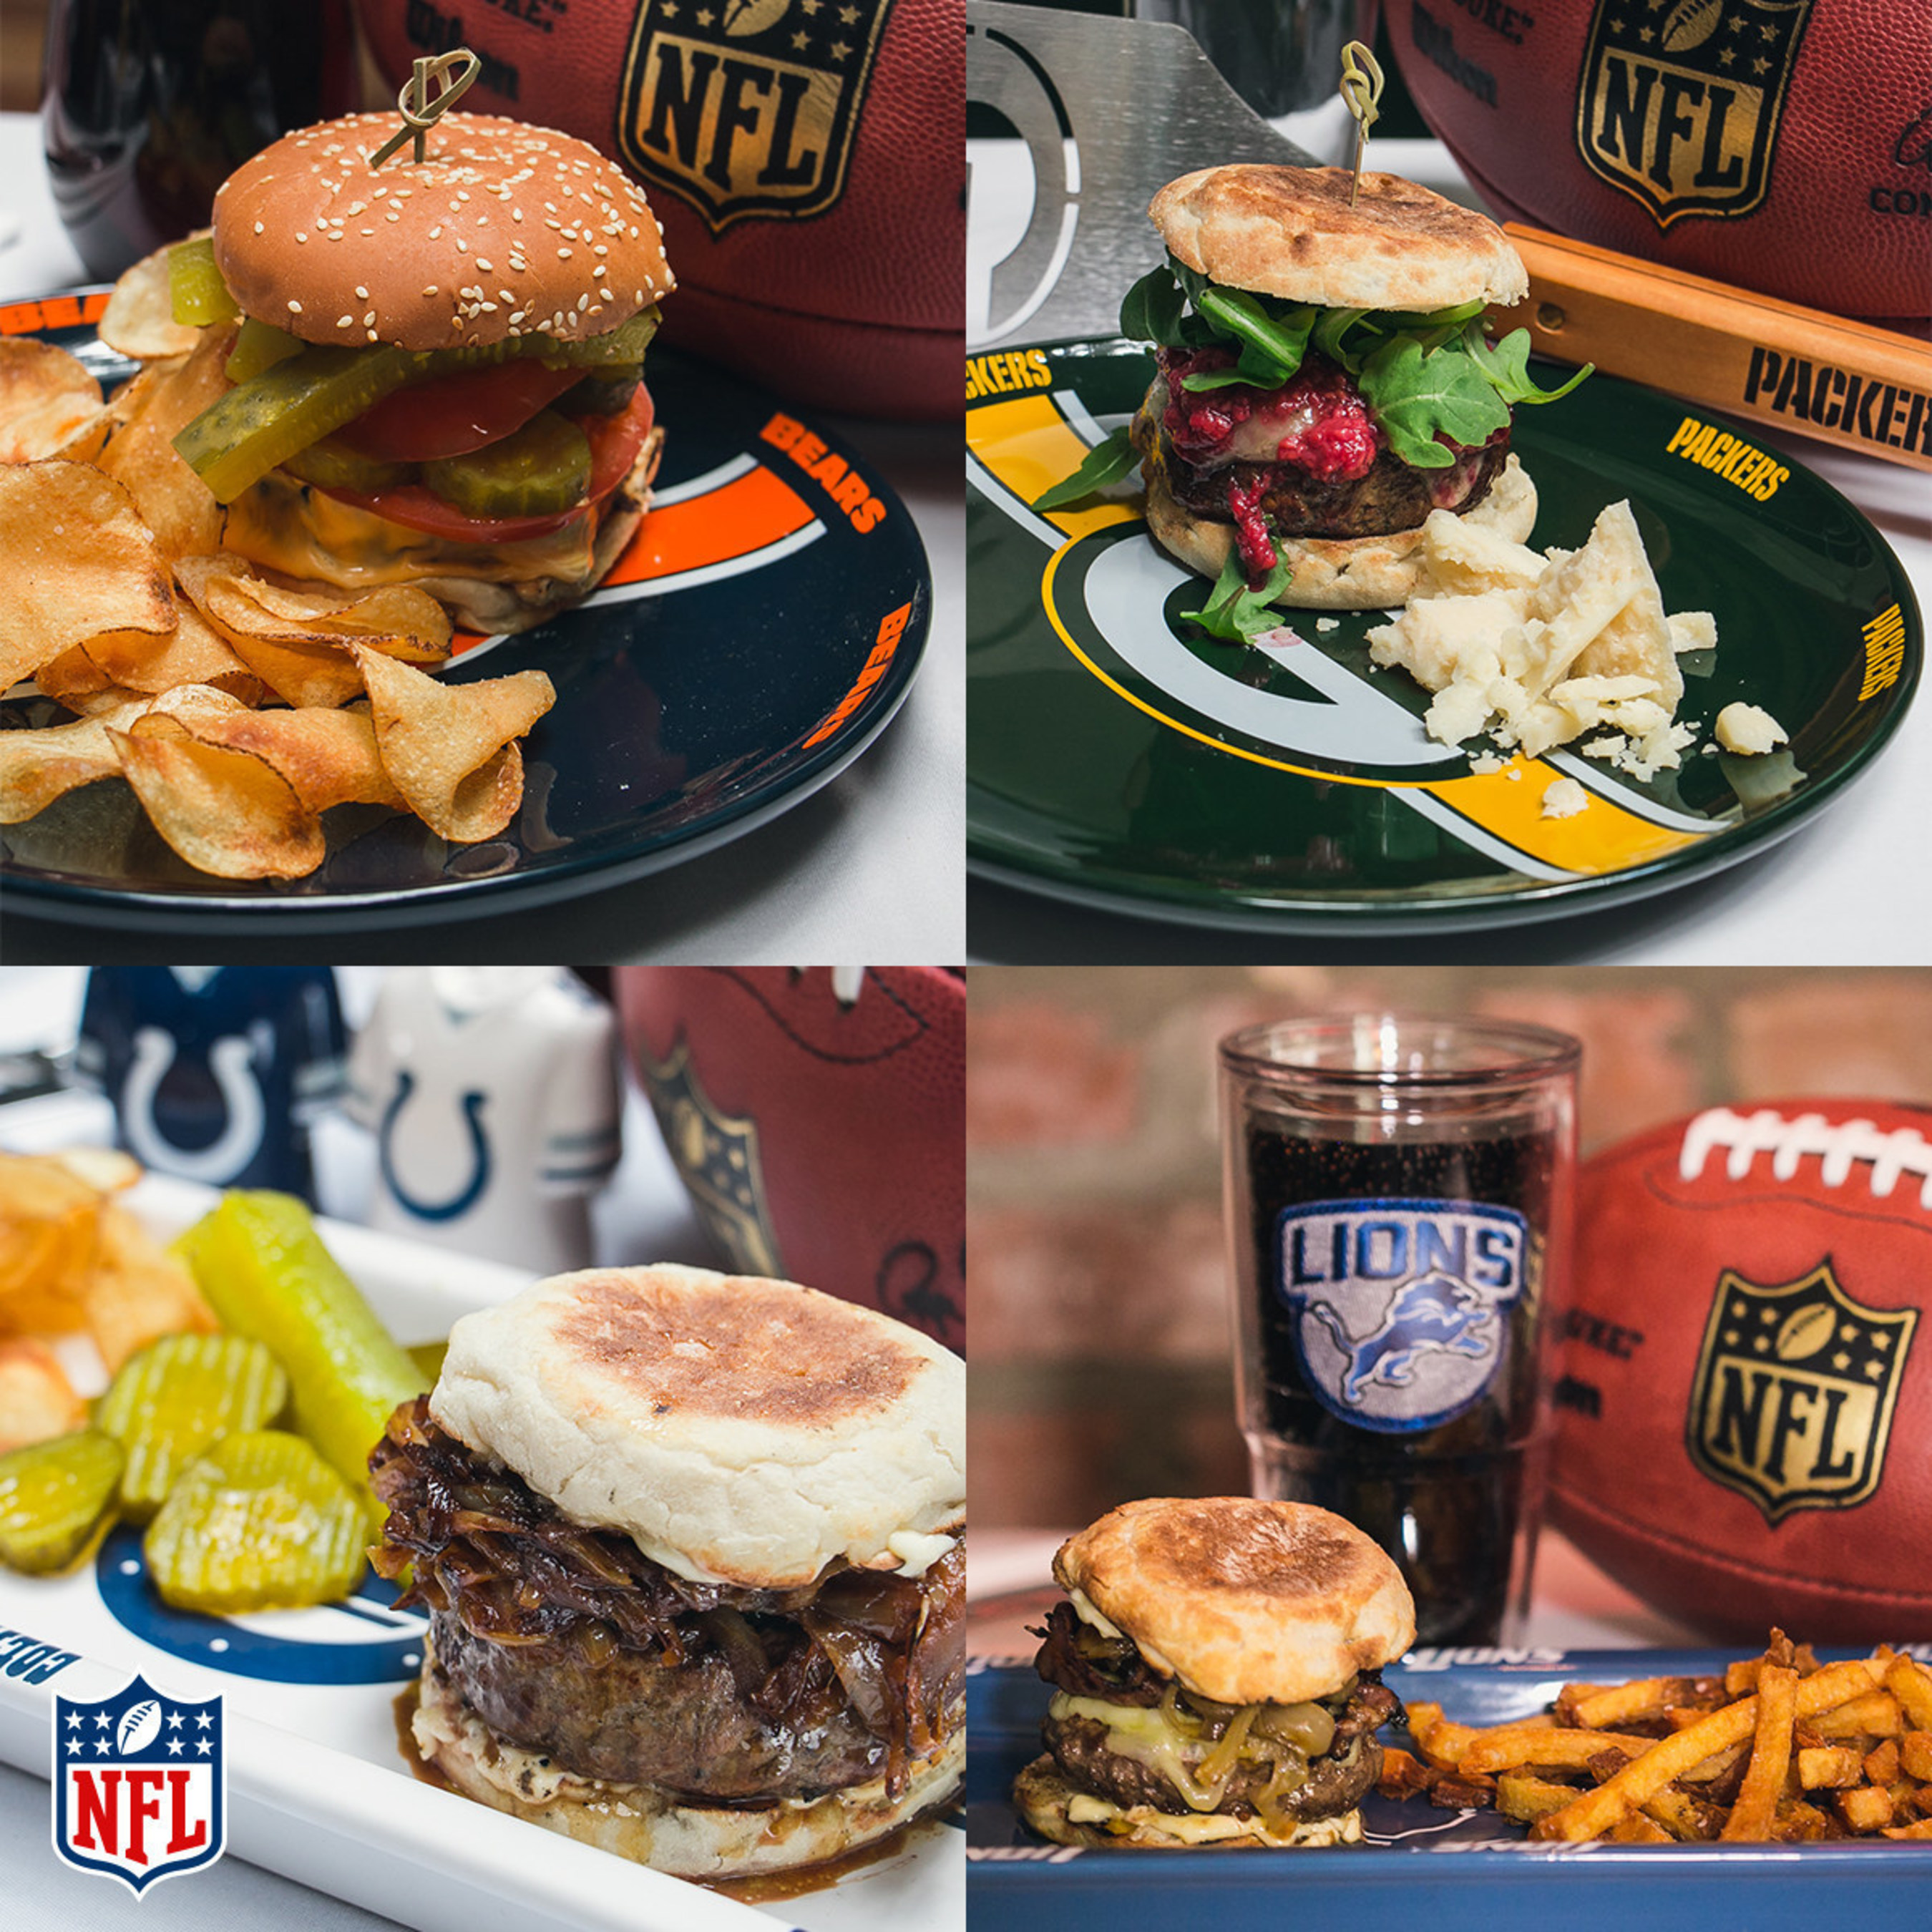 Angie Mar, Chopped "Grill Masters" Champion, NFL Homegating "Burger Maestro," and Chef and Owner of New York's celebrated Beatrice Inn, has created 32 diverse and delicious burger recipes, inspired by each NFL market, for fans across the country to cook and enjoy with their friends and family on game day.